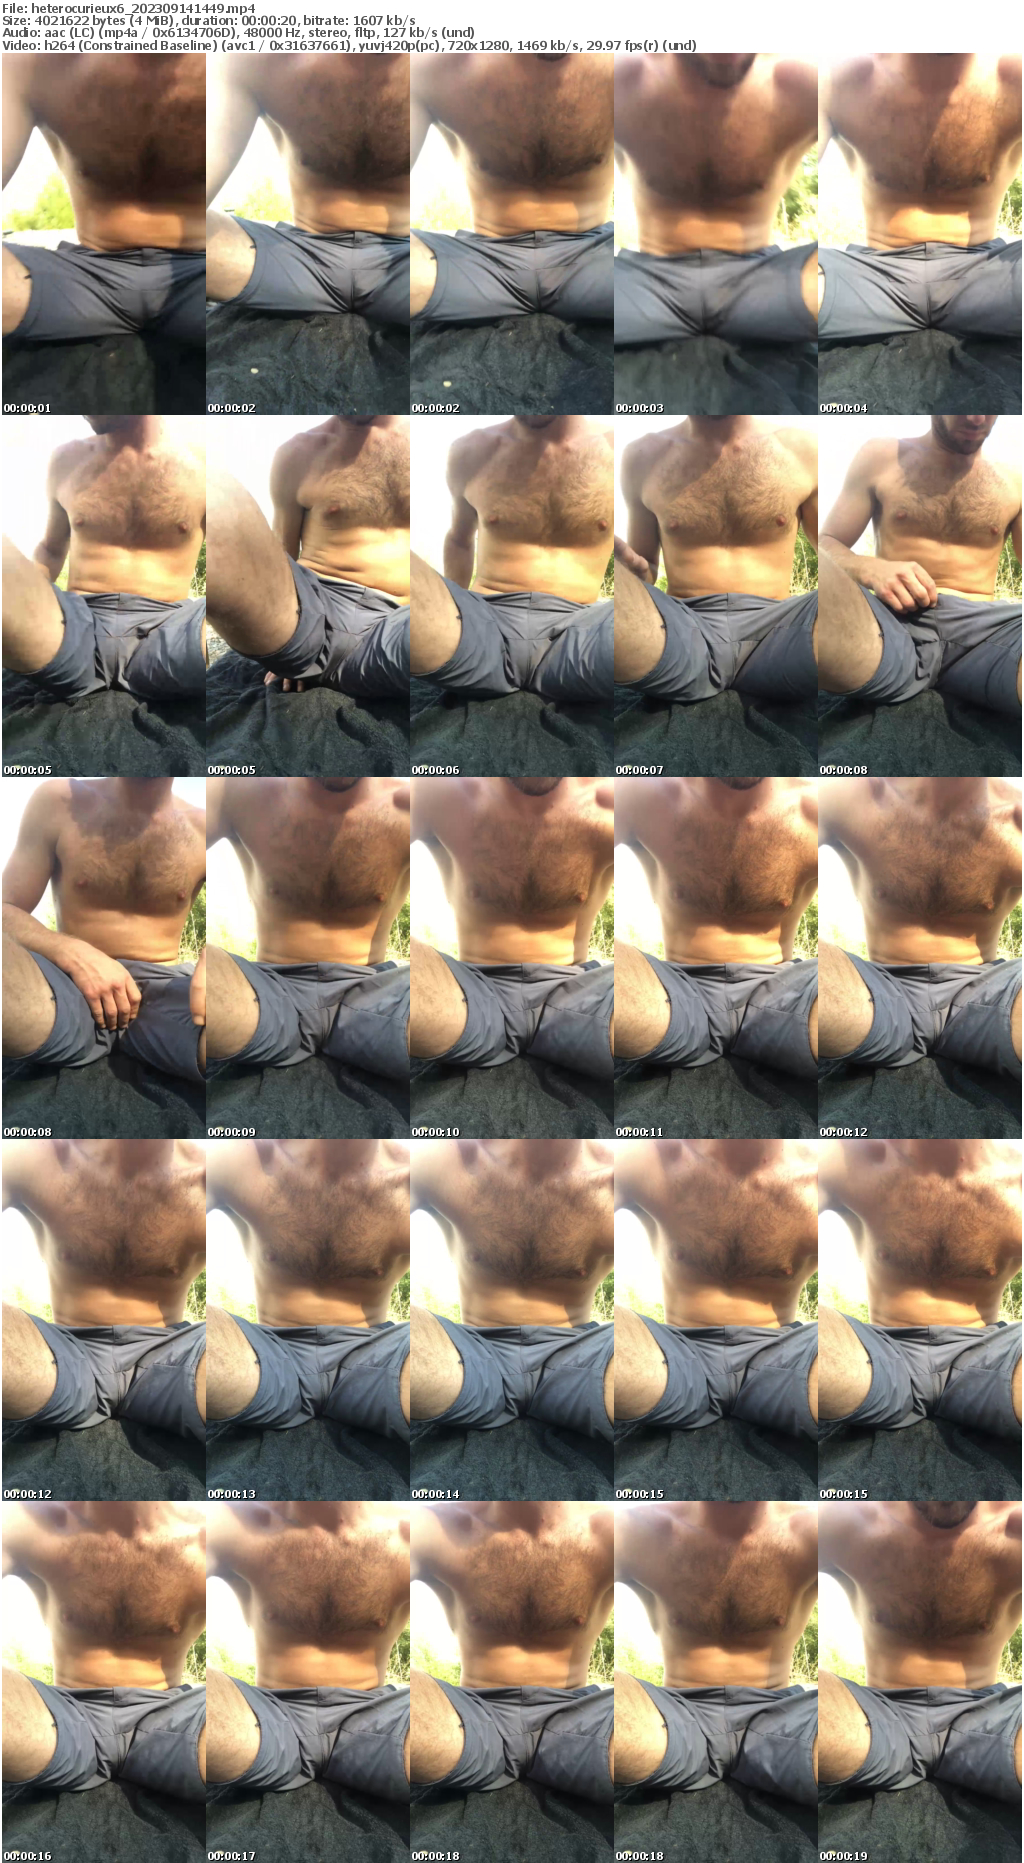 Preview thumb from heterocurieux6 on 2023-09-14 @ cam4